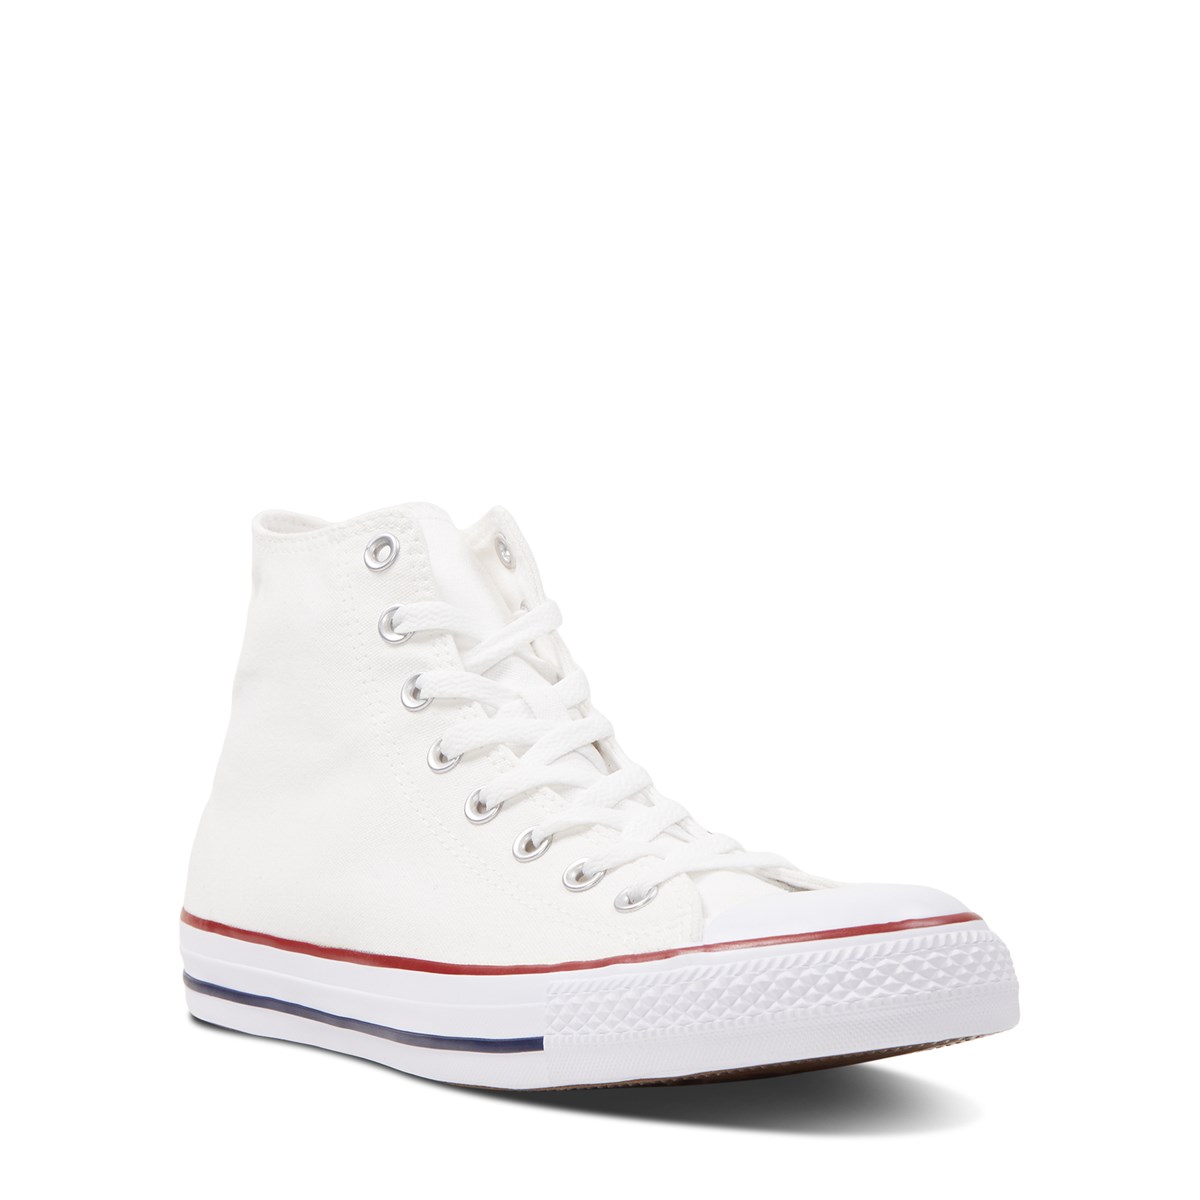 Men's Chuck Taylor All Star Classic Hi Top Sneakers in White | Little ...